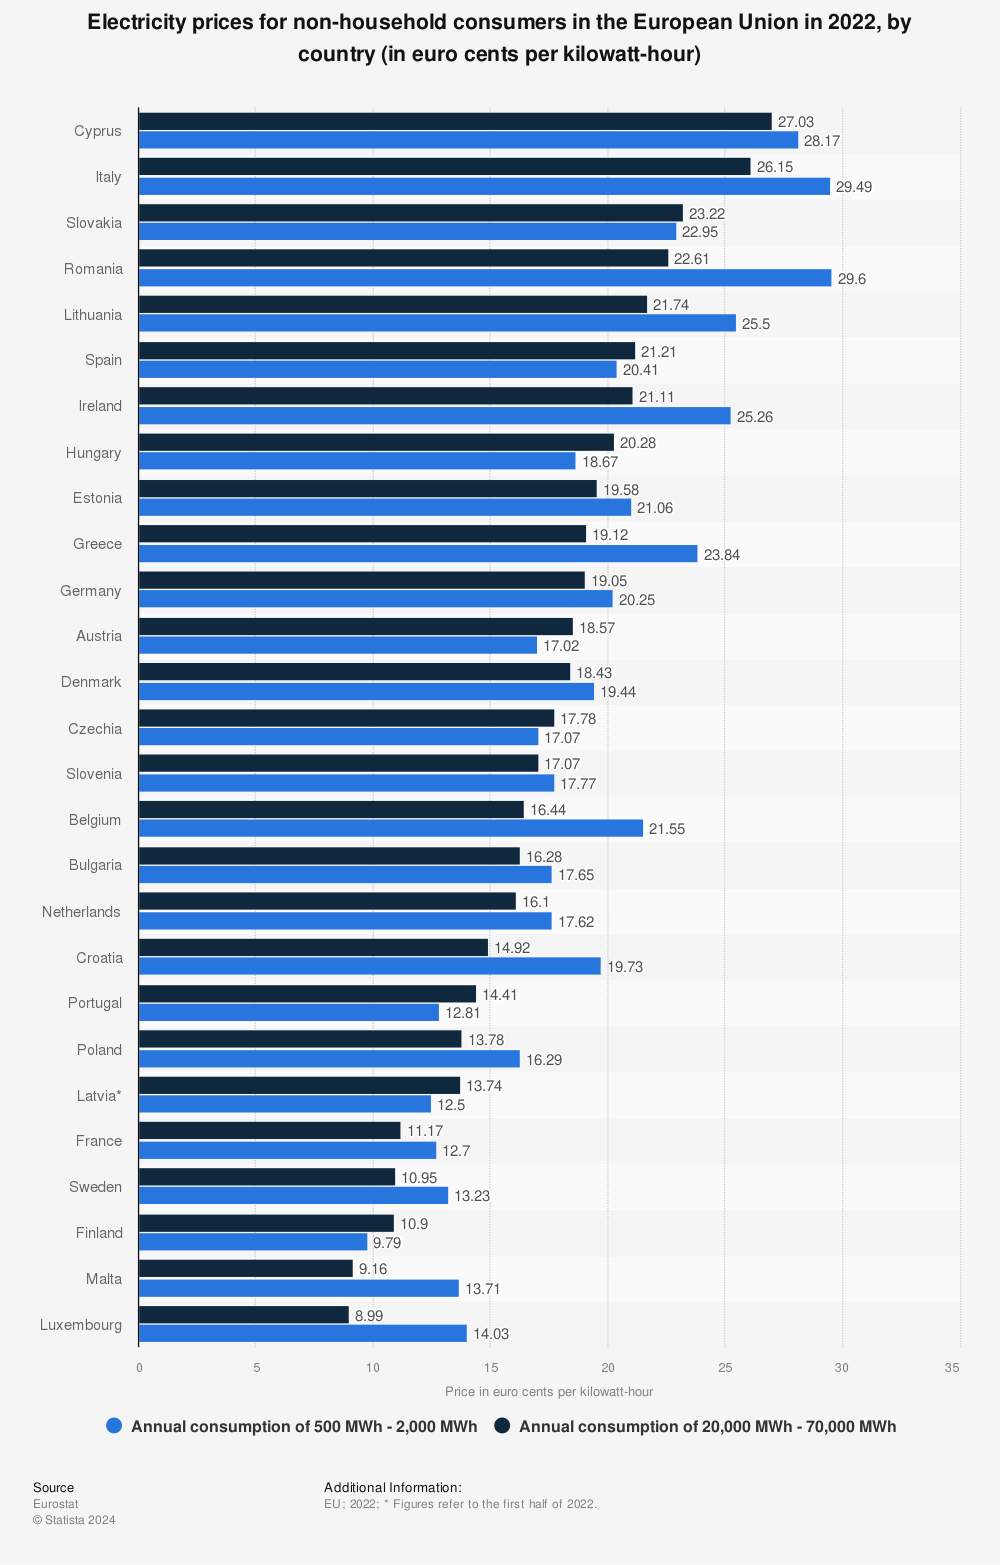 Statistic: Electricity prices for non-household consumers in the European Union in 2022, by country (in euro cents per kilowatt-hour) | Statista